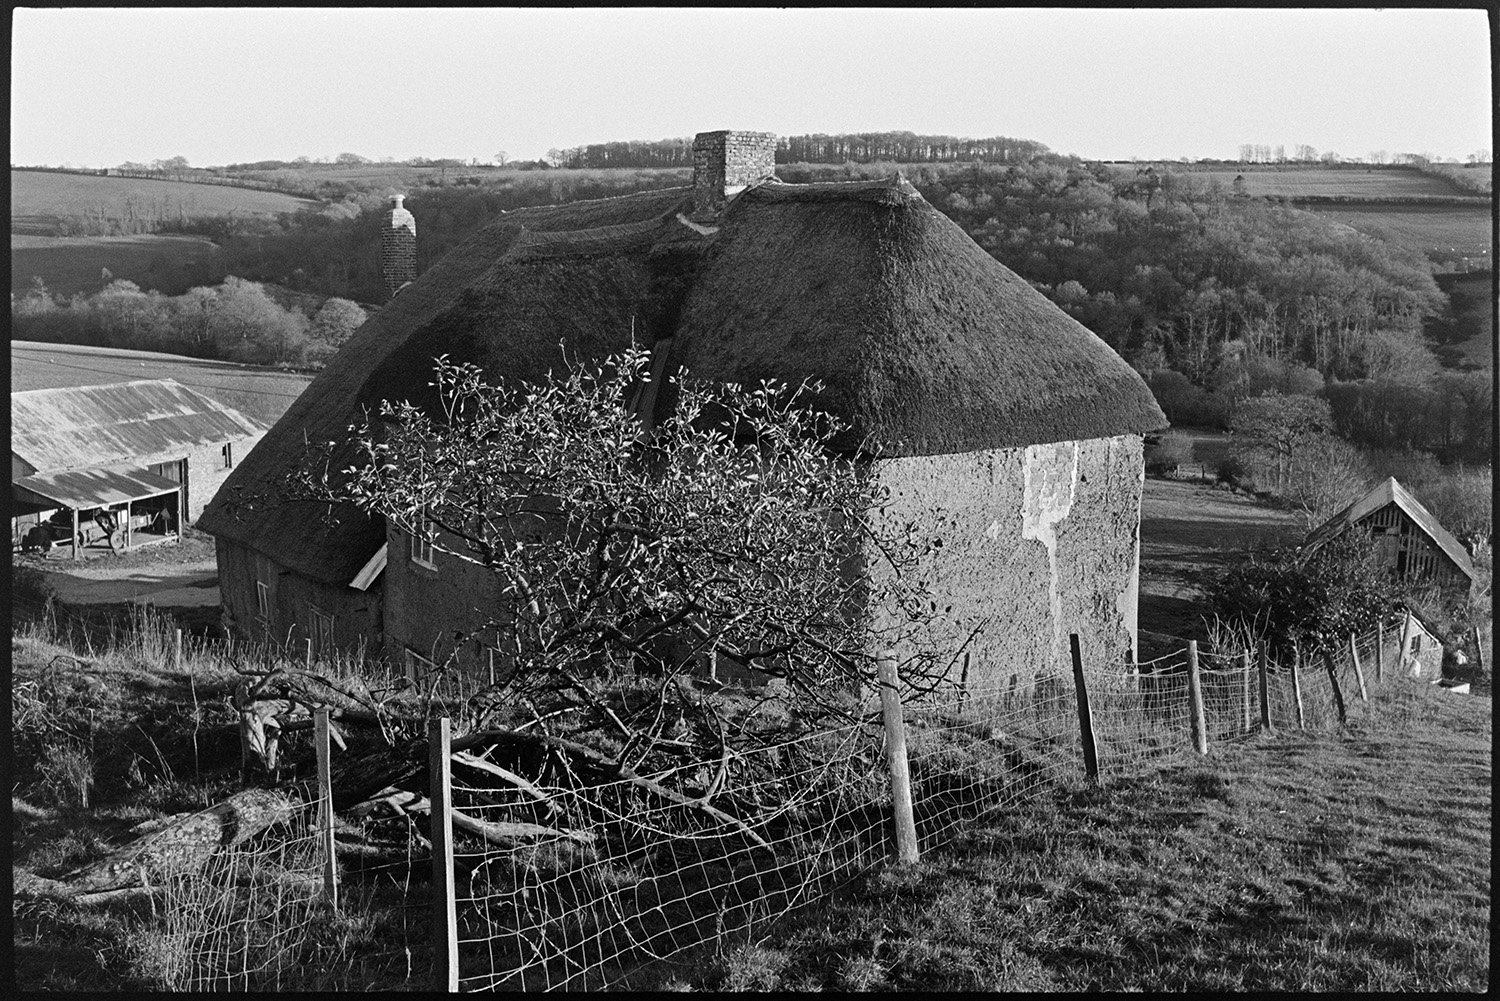 Cob and thatch farmhouse, orchard remains of, early morning. 
[A cob and thatch farmhouse at Brookland, Chulmleigh. A tree in the remains of an orchard can be seen in the foreground. Barns, farm buildings, fields and woodland are visible in the background.]